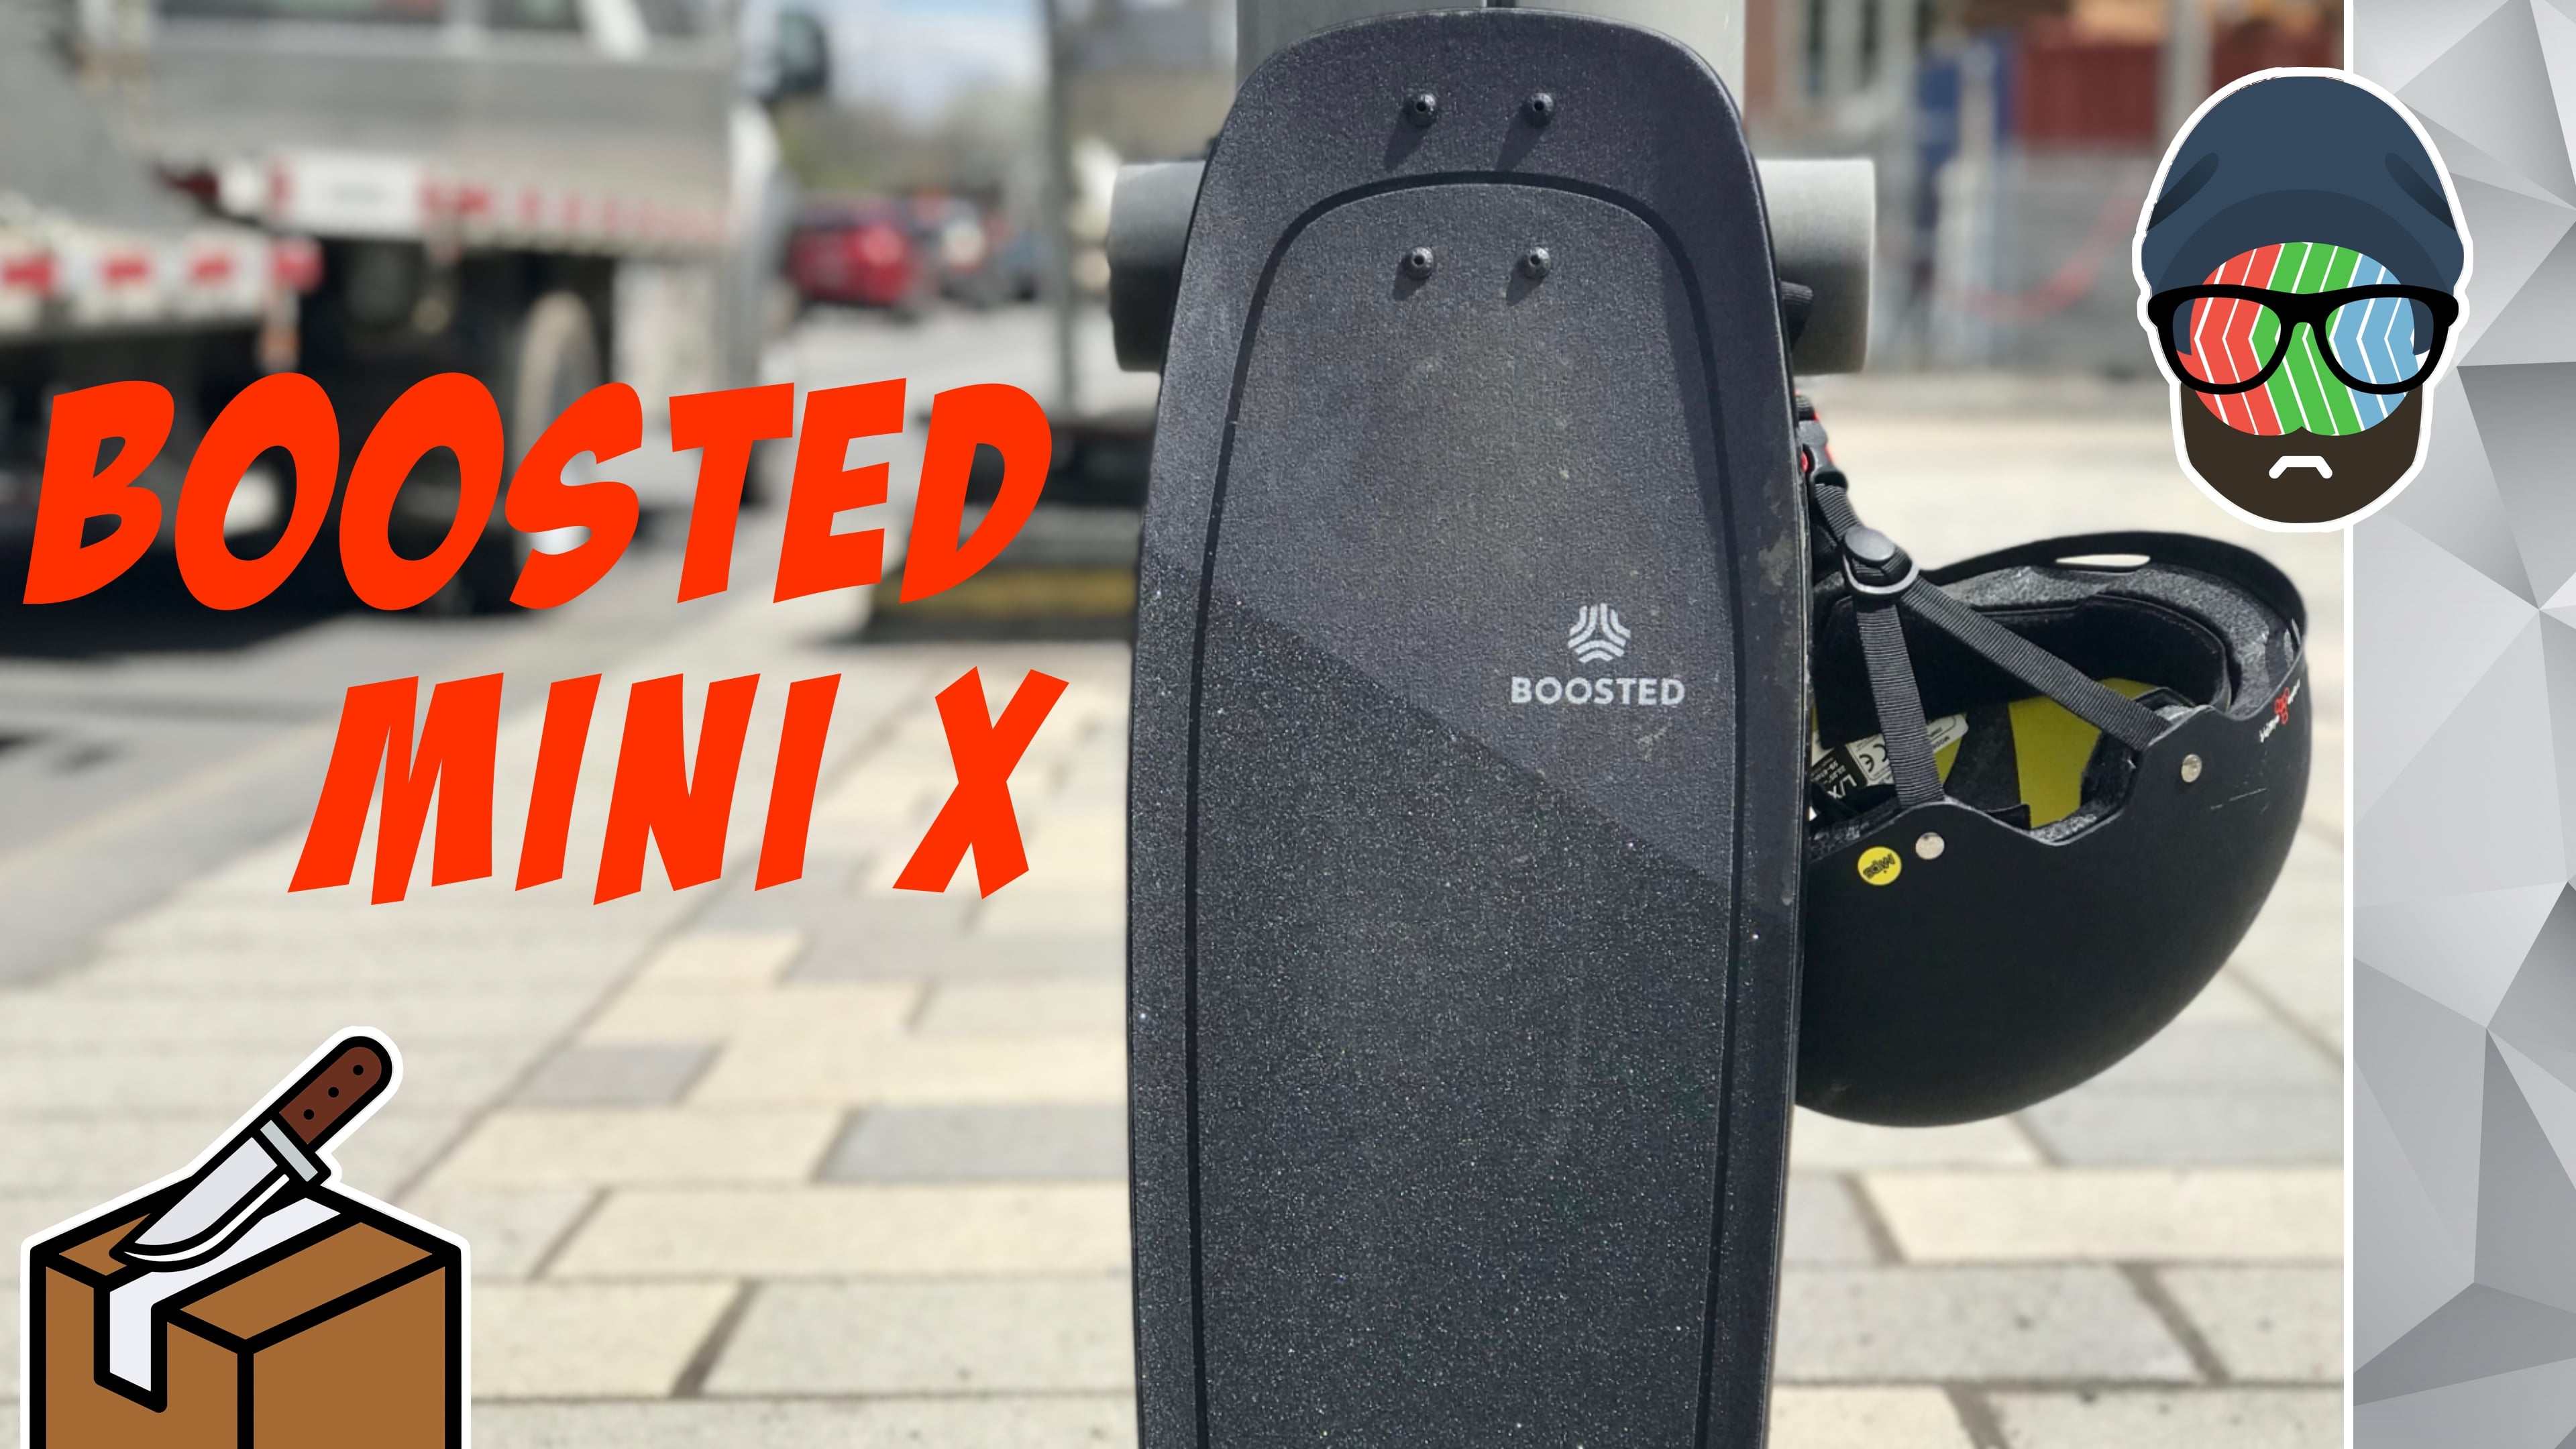 Boosted Mini X Unboxing on Video!